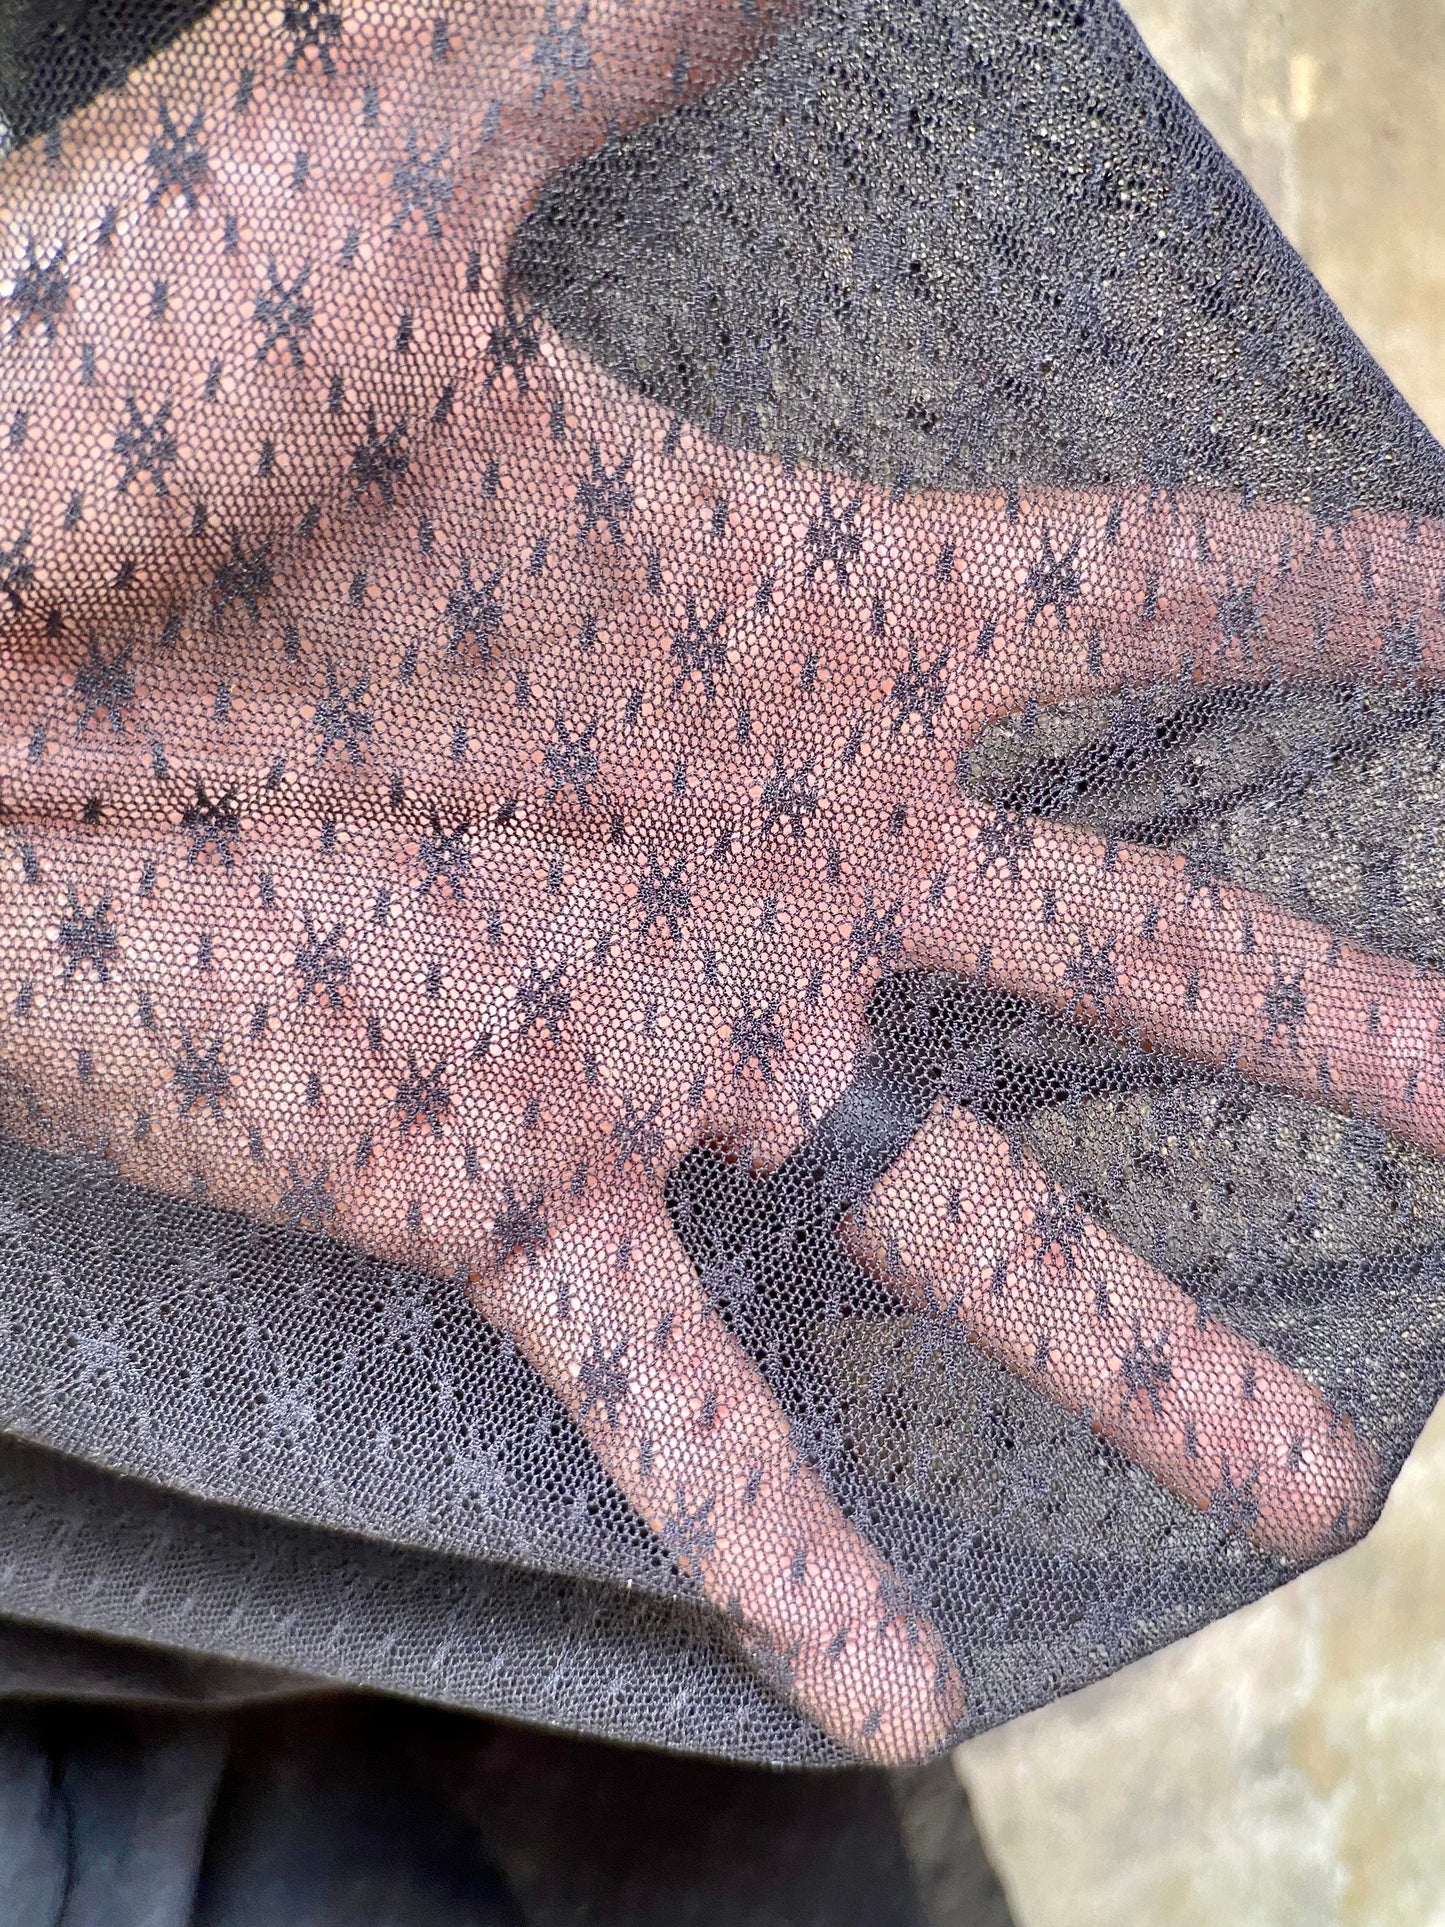 Soft Sheer Power Mesh Net Polyester Spandex 2 Way Stretch for Dance, Gymnastics, Underwear Stocking, Lingerie, Intimates Fabric By The Yard